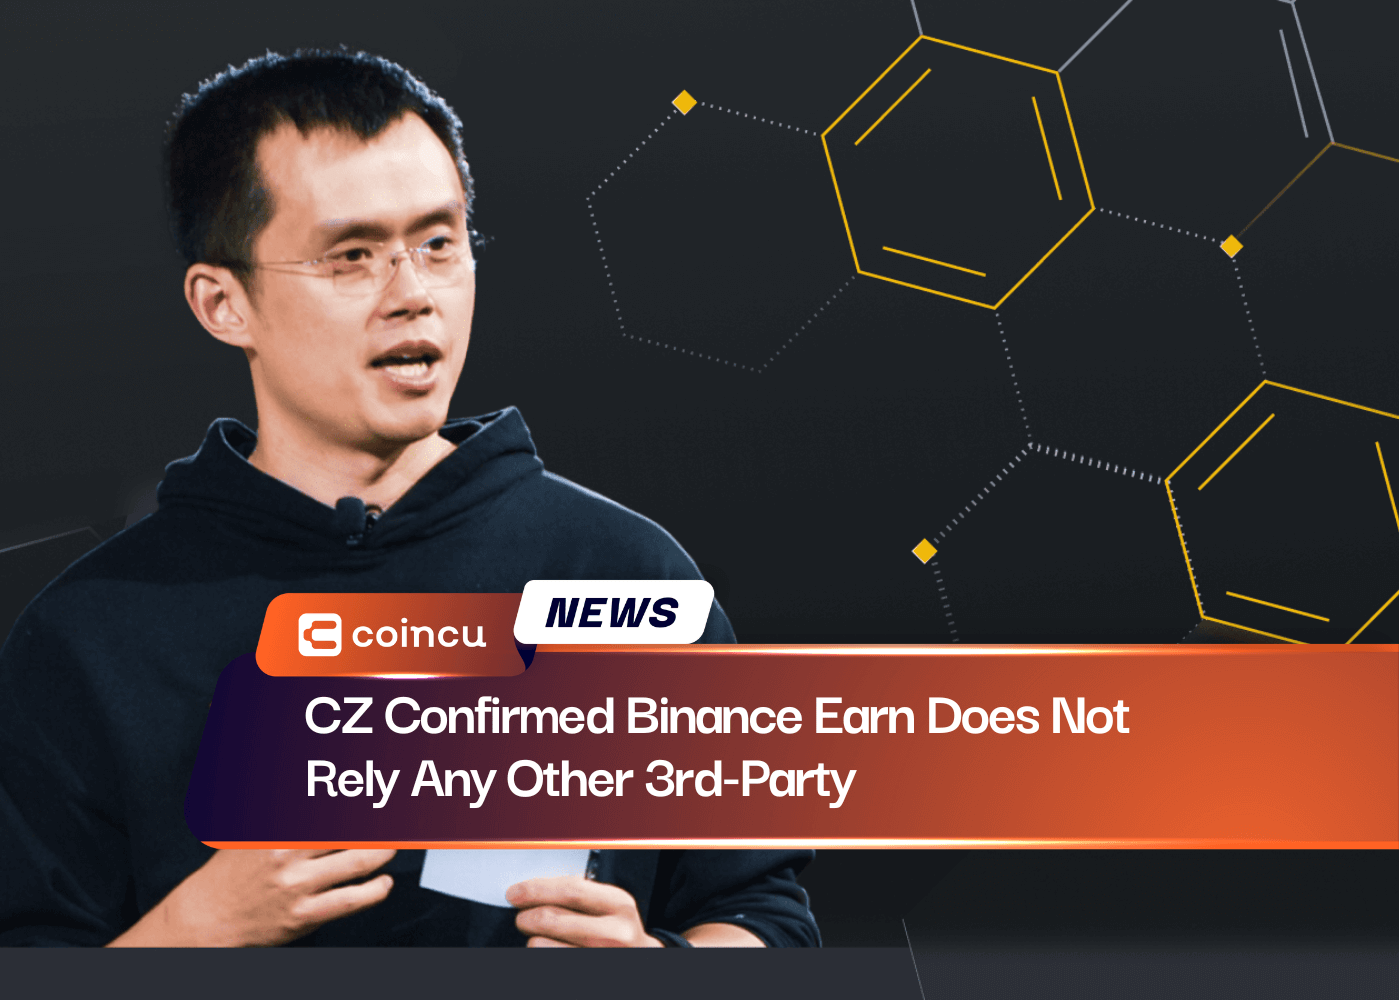 CZ Confirmed Binance Earn Does Not Rely Any Other 3rd-Party